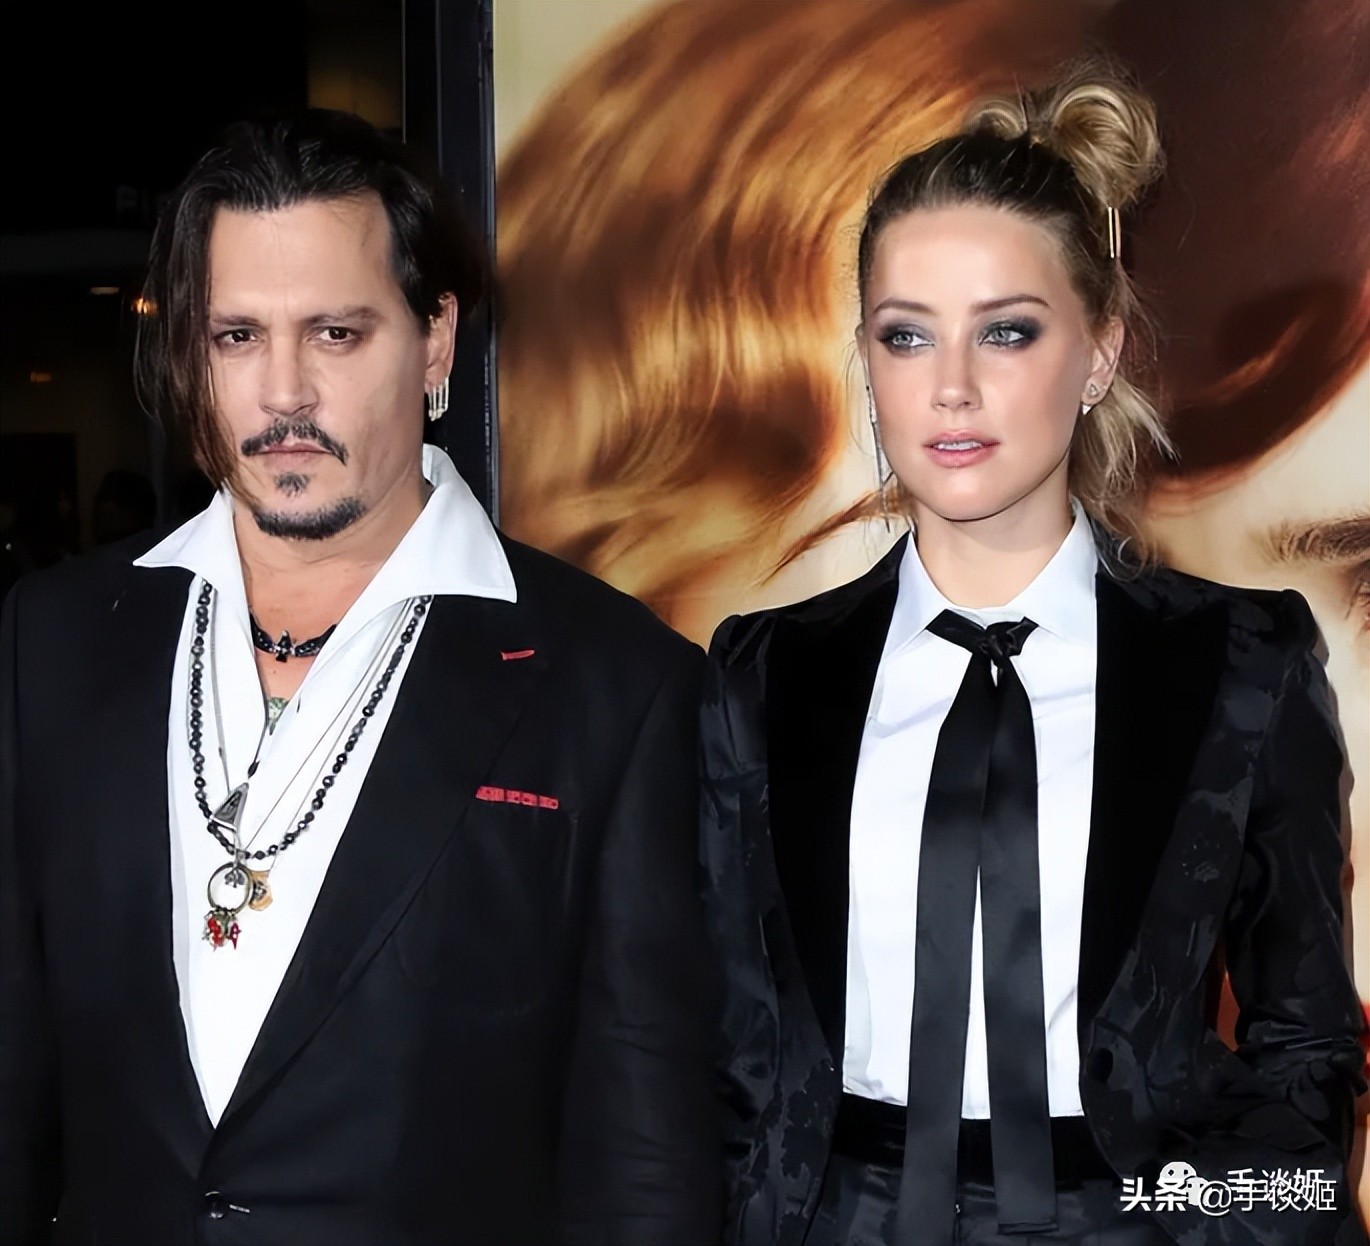 Johnny Depp, Amber Heard trial: when recreational drug use turns toxic